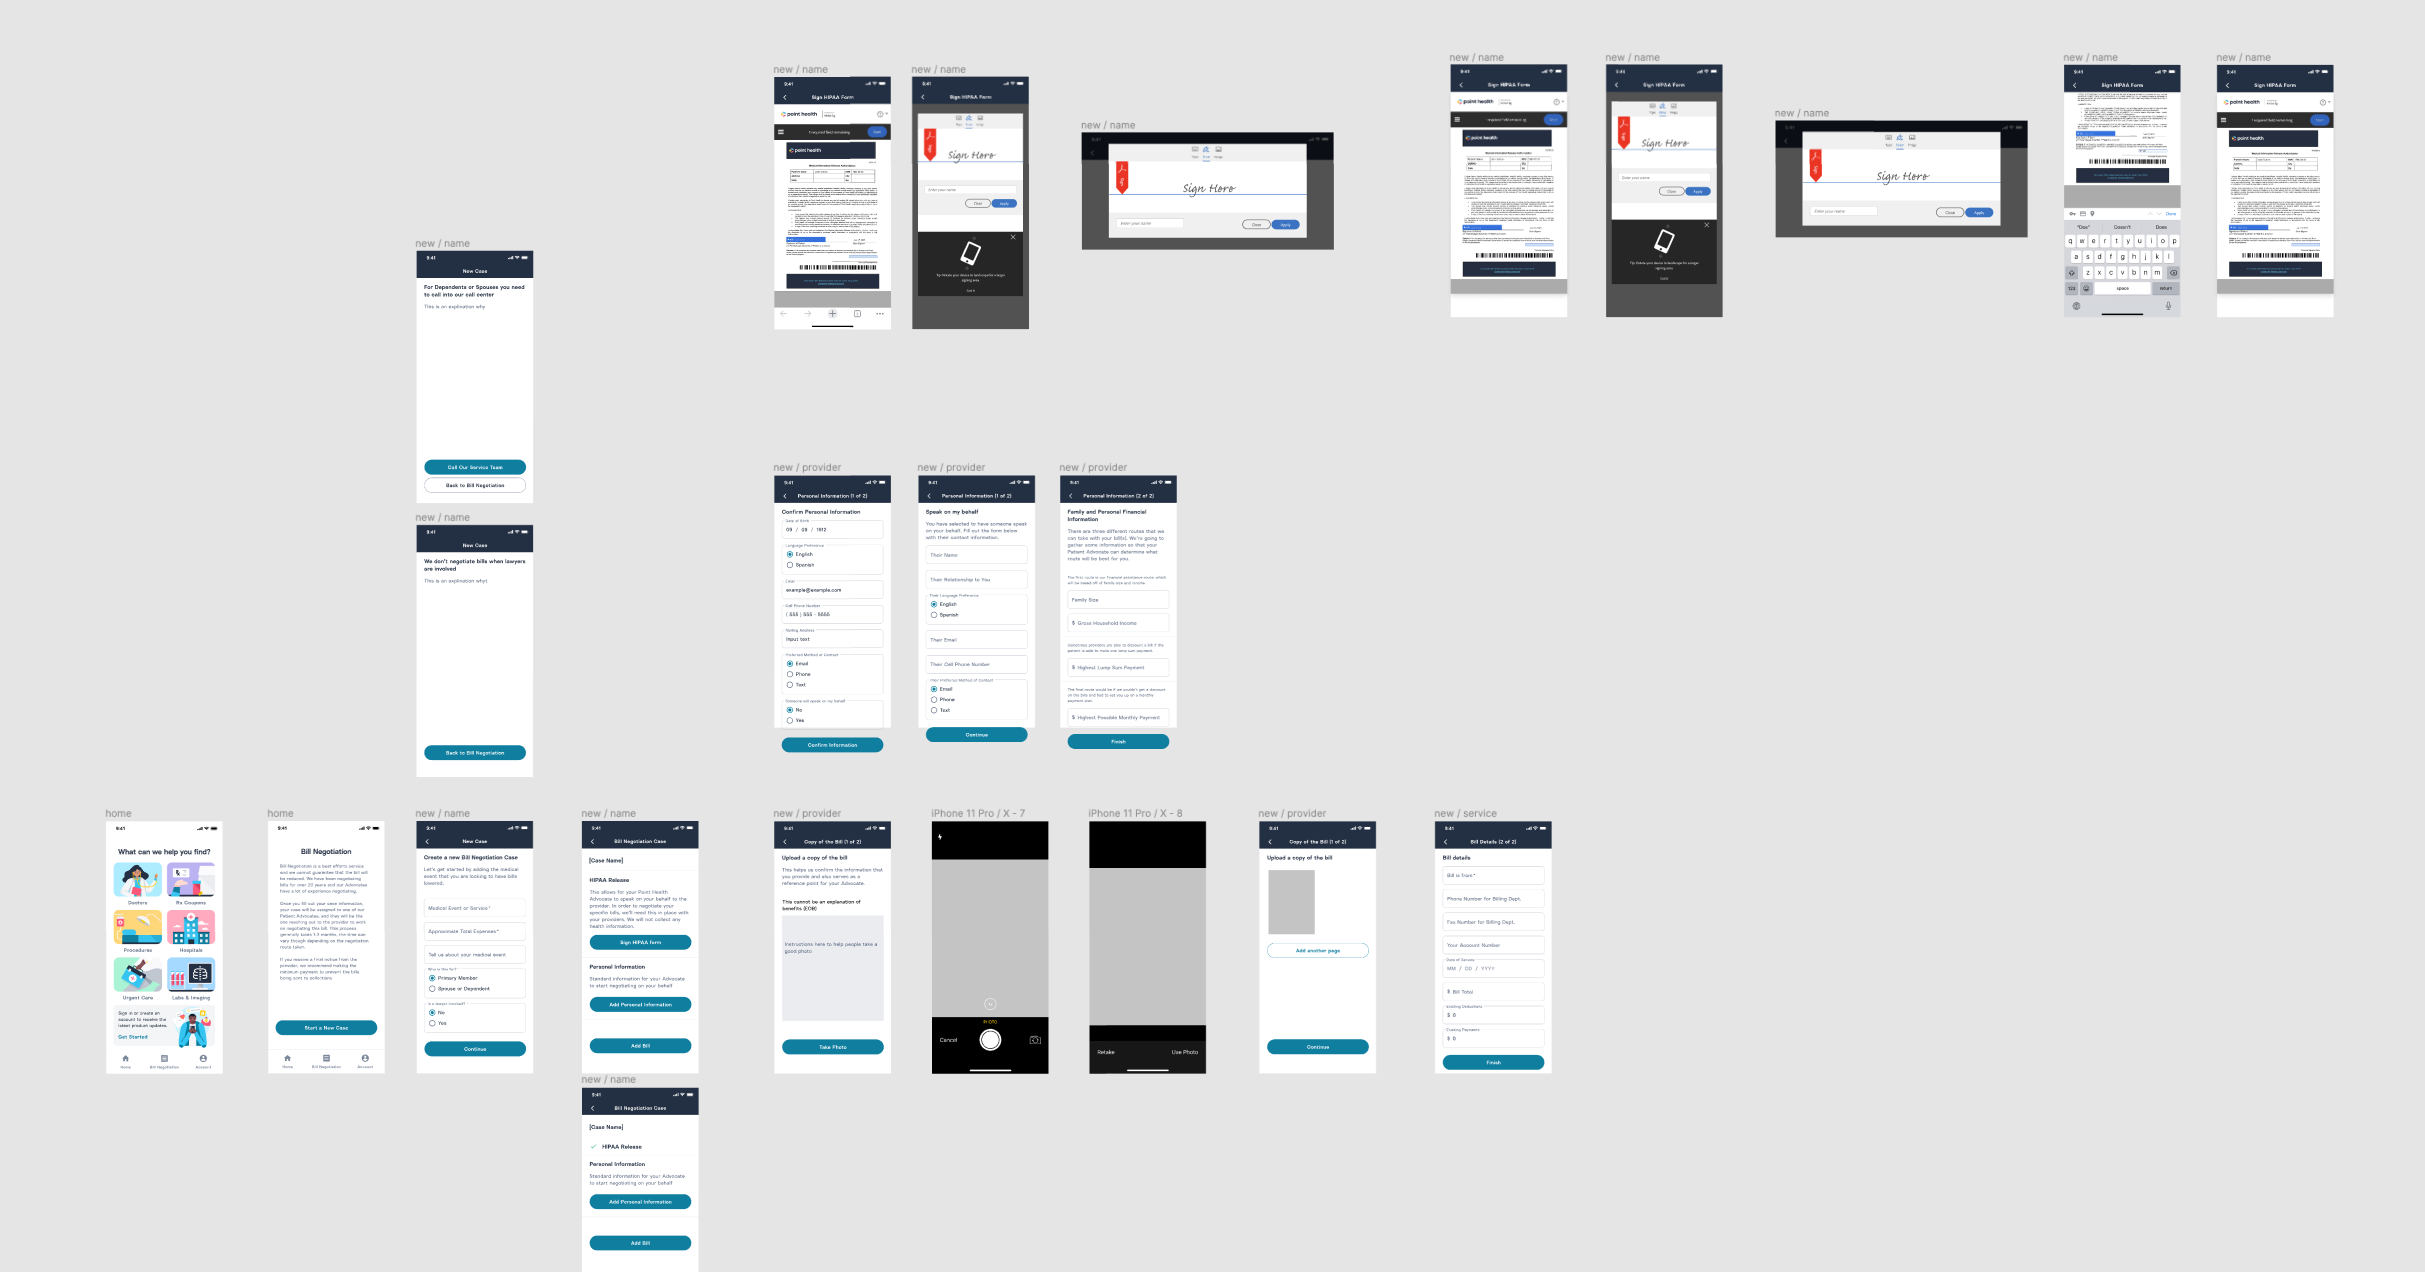 A screenshot of a flow of screens in a prototype